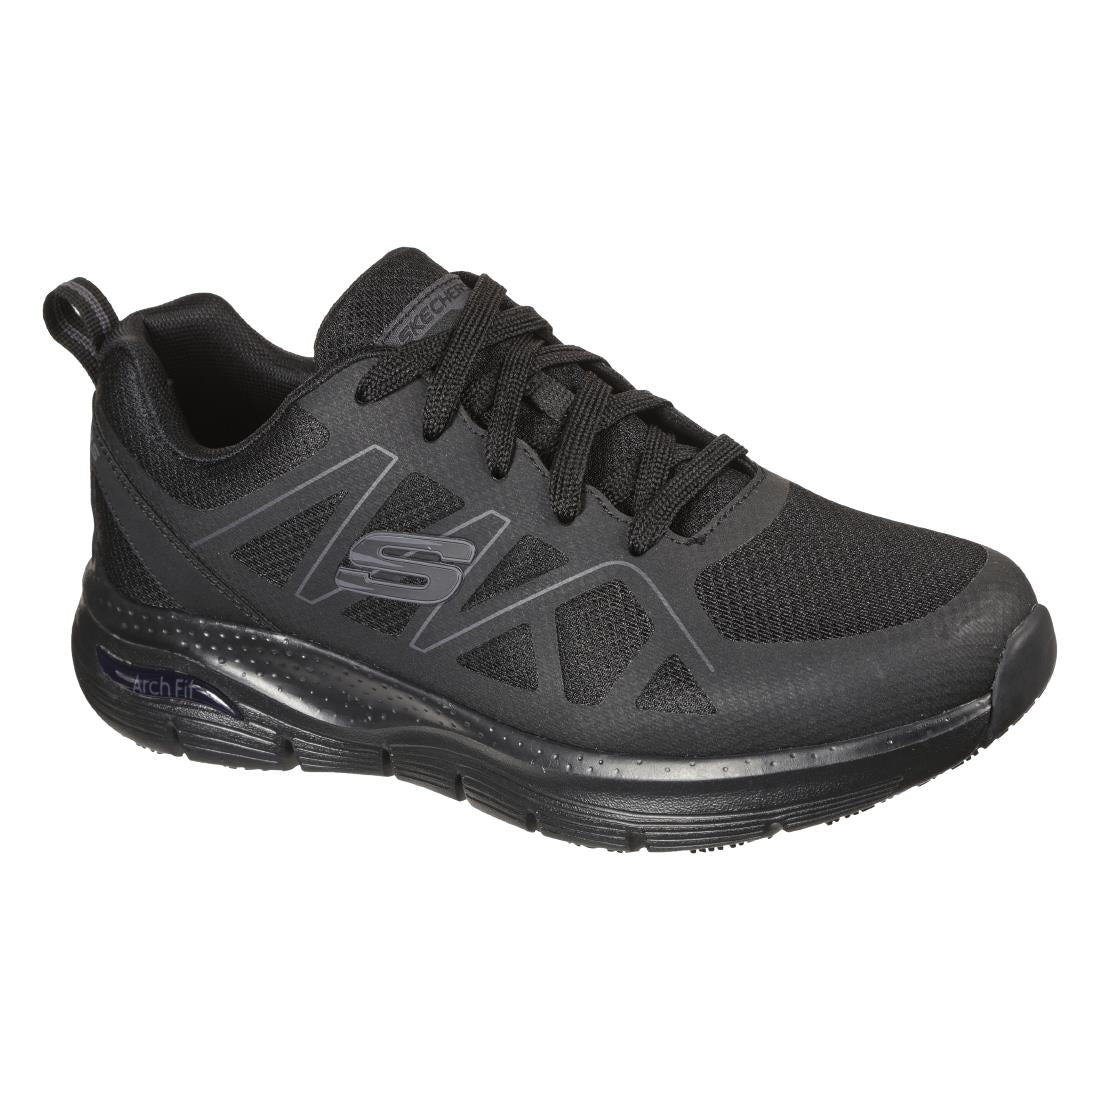 BB673-41 Skechers Axtell Slip Resistant Arch Fit Trainer Size 41 JD Catering Equipment Solutions Ltd